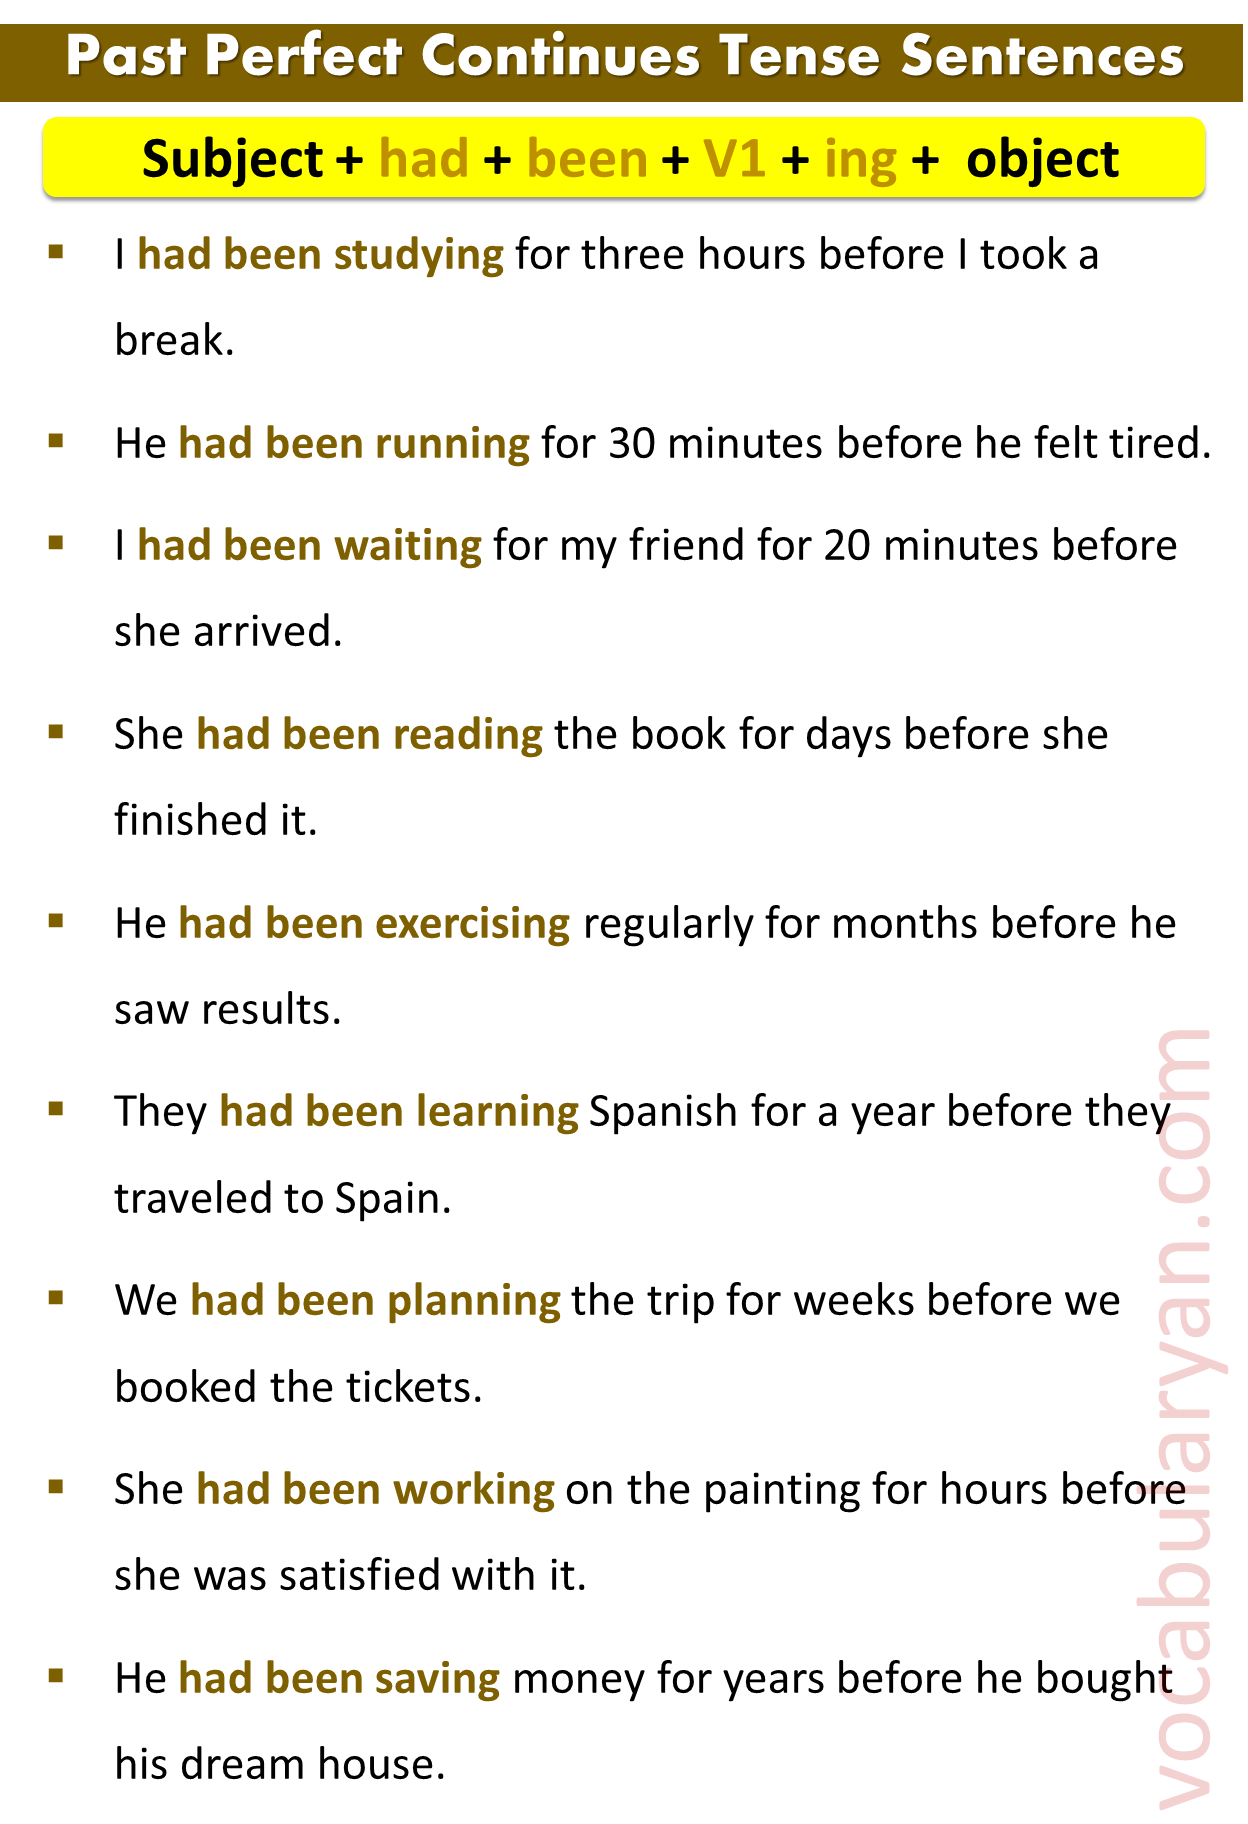 50+ Past Perfect Continuous Sentences Examples 